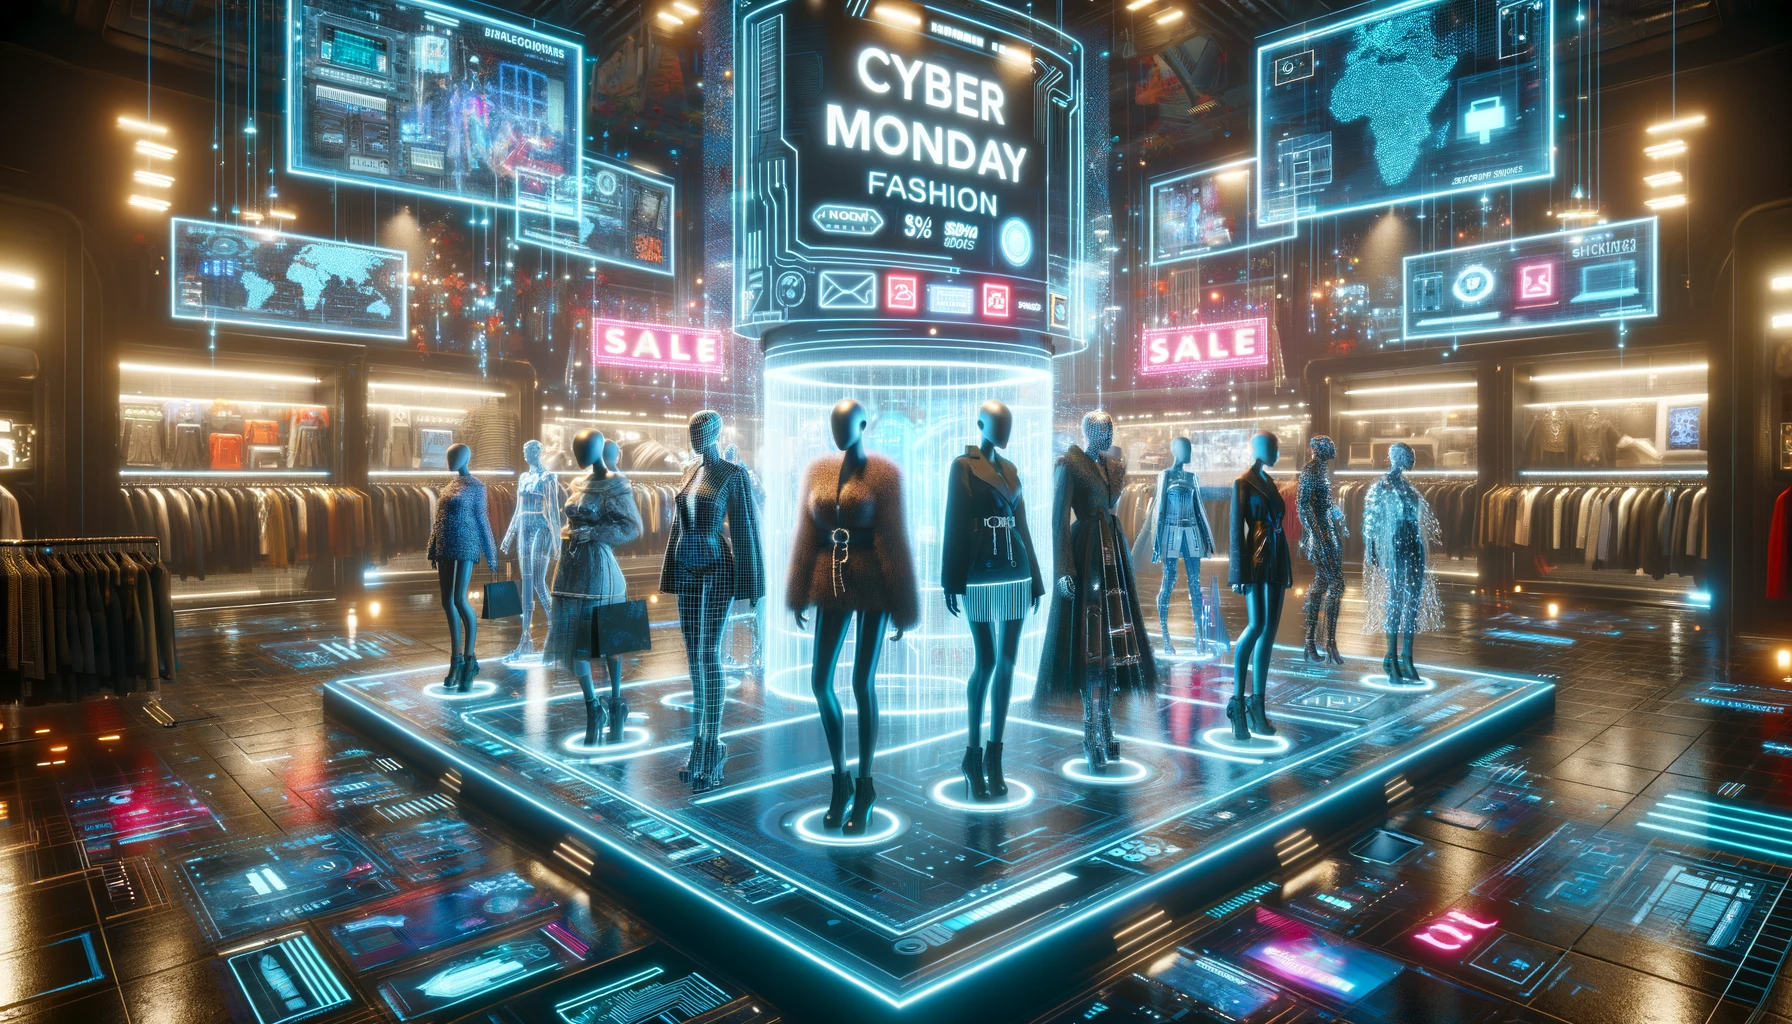  A futuristic 3D rendered image representing Fashion on Cyber Monday. The image shows a bustling digital marketplace, with holographic displays showcasing different clothing 